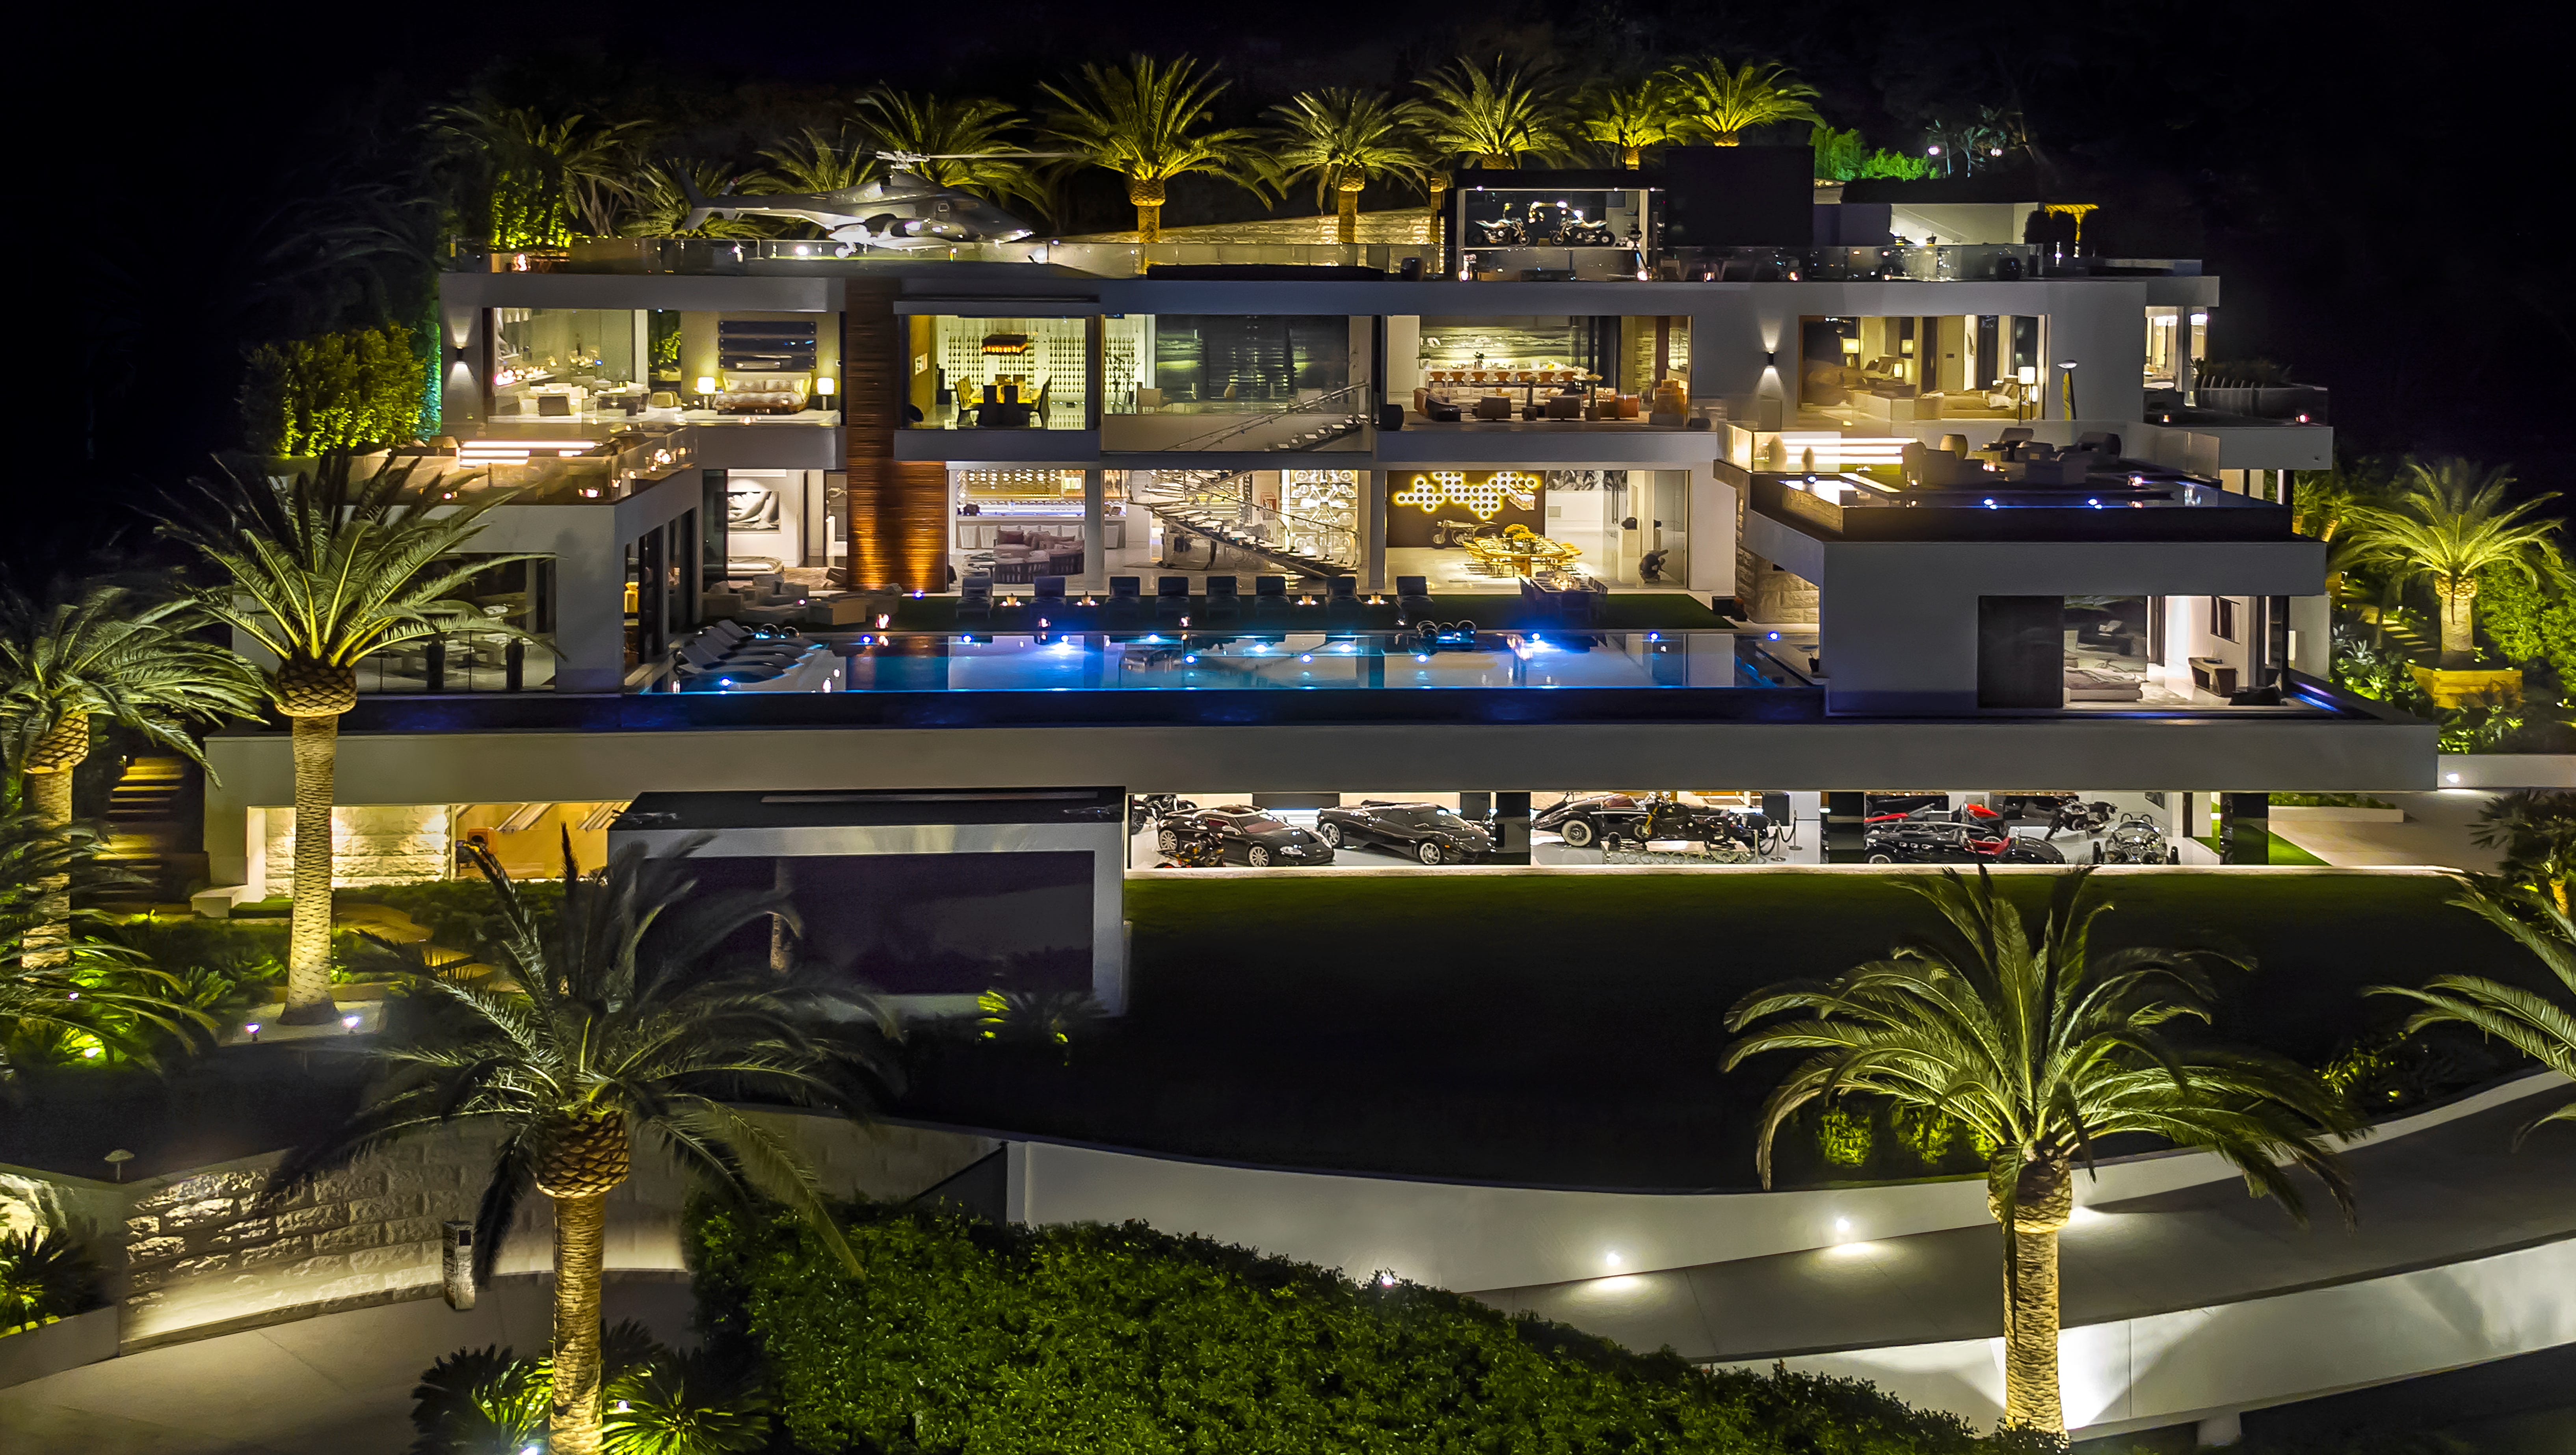 This is the most expensive home for sale in the U.S.